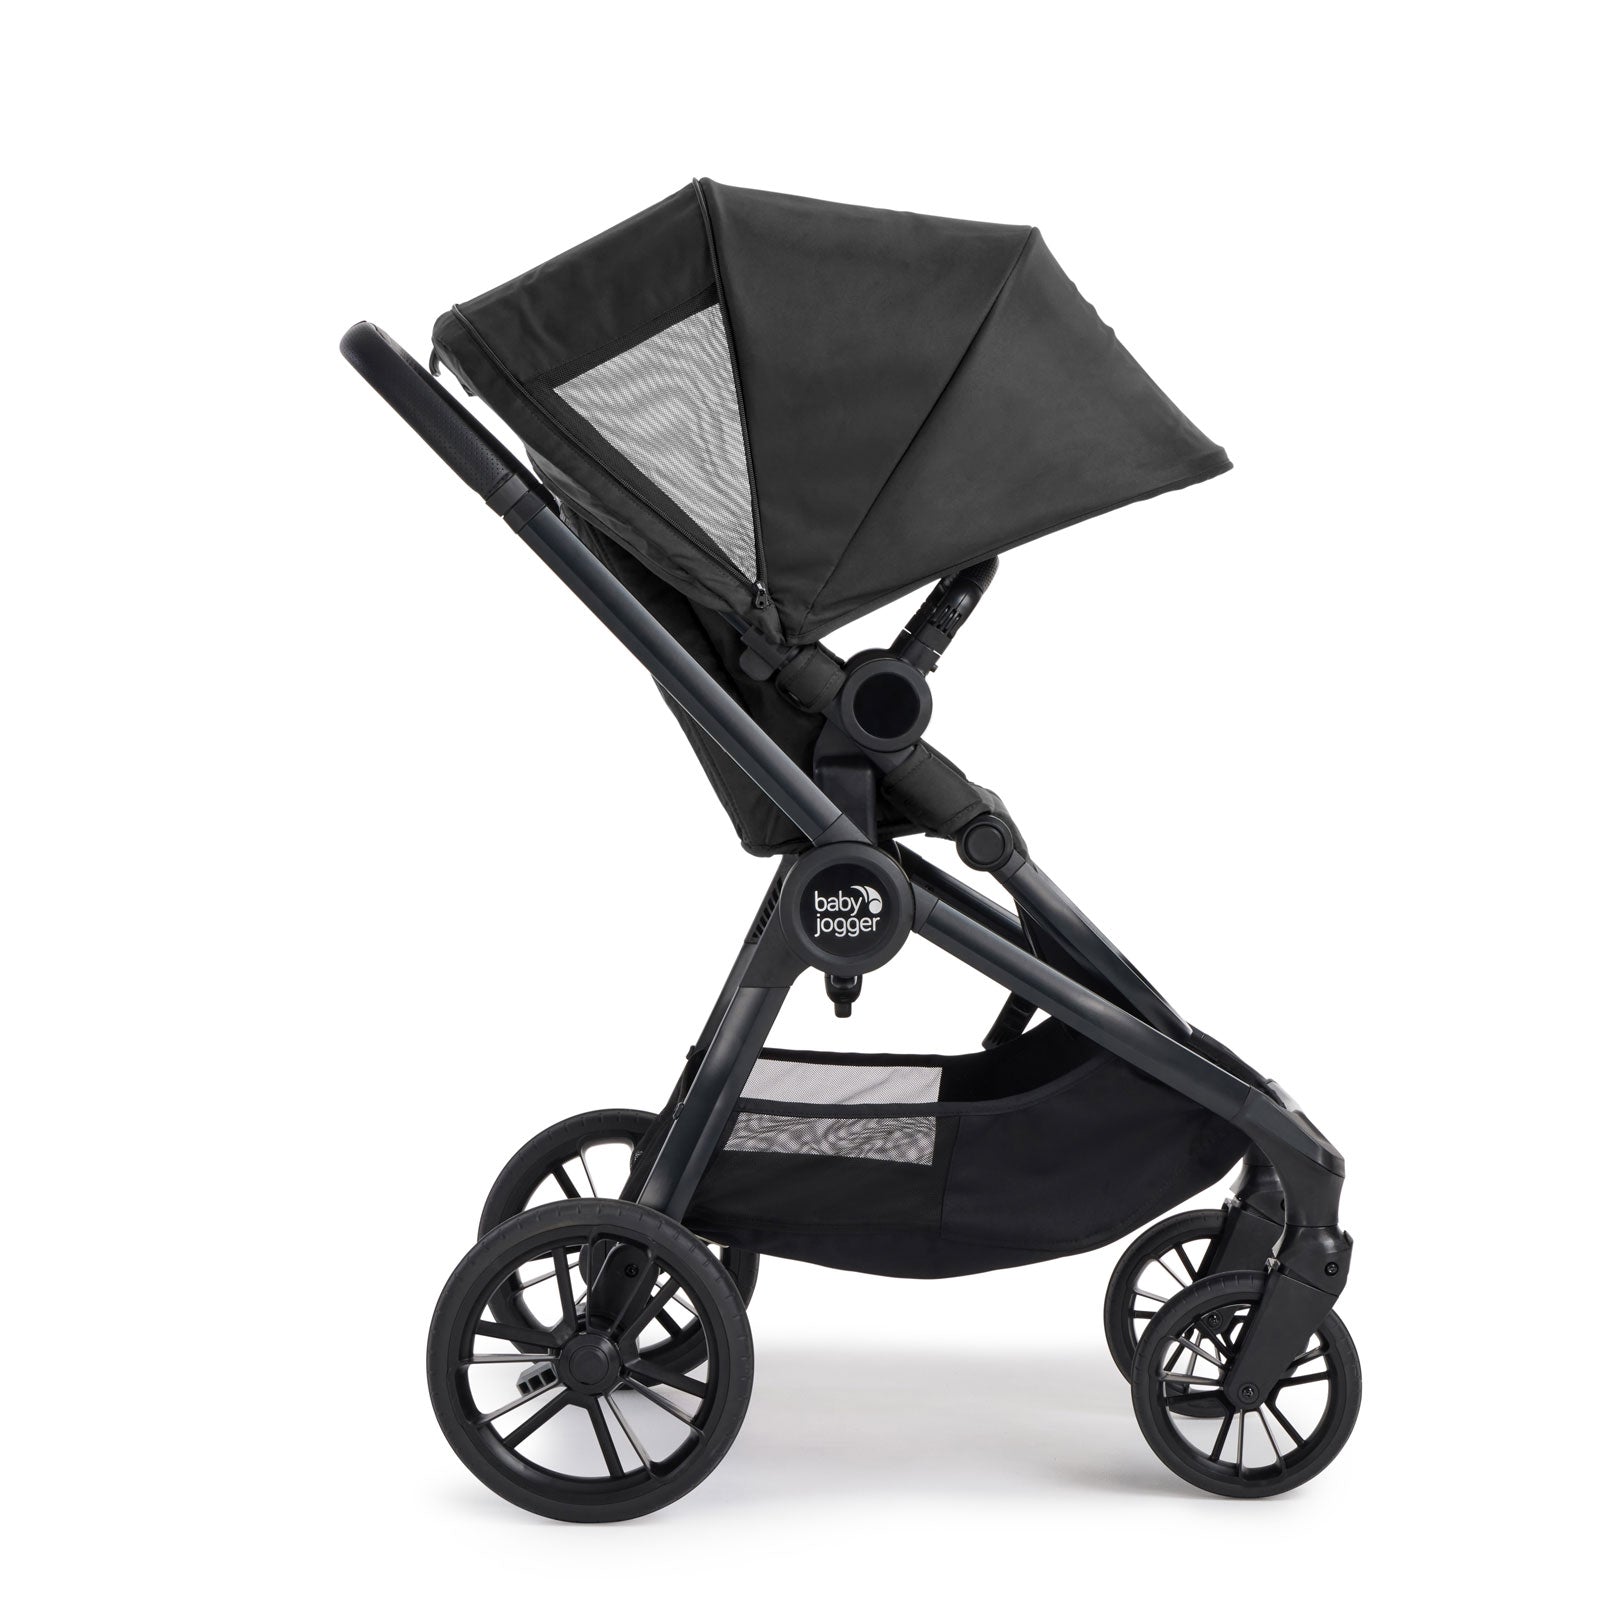 Avl sommer Plaske Baby Jogger City Sights Stroller | The Baby Cubby